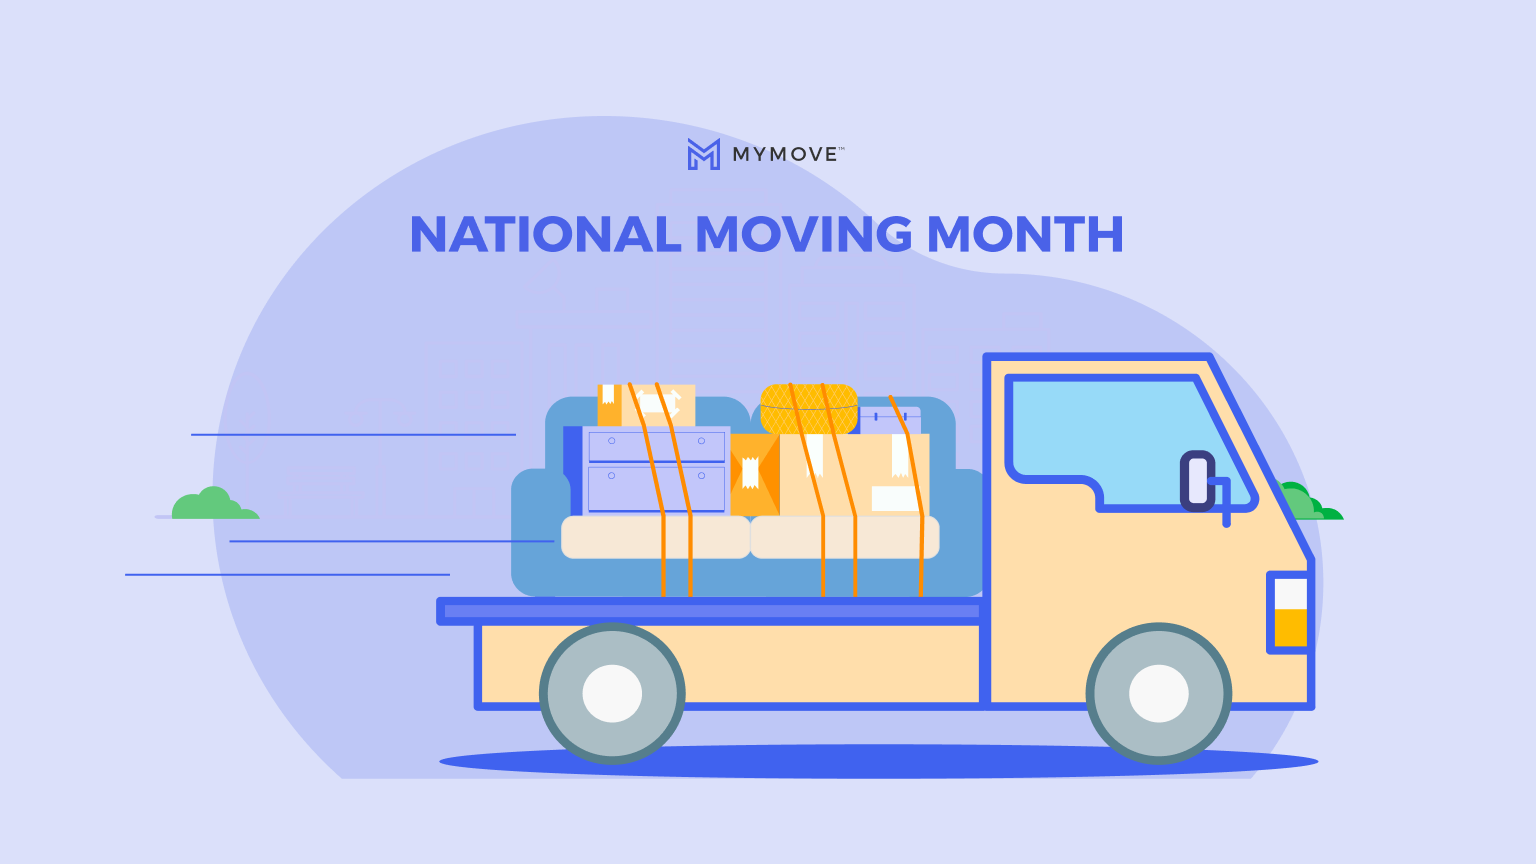 May is National Moving Month